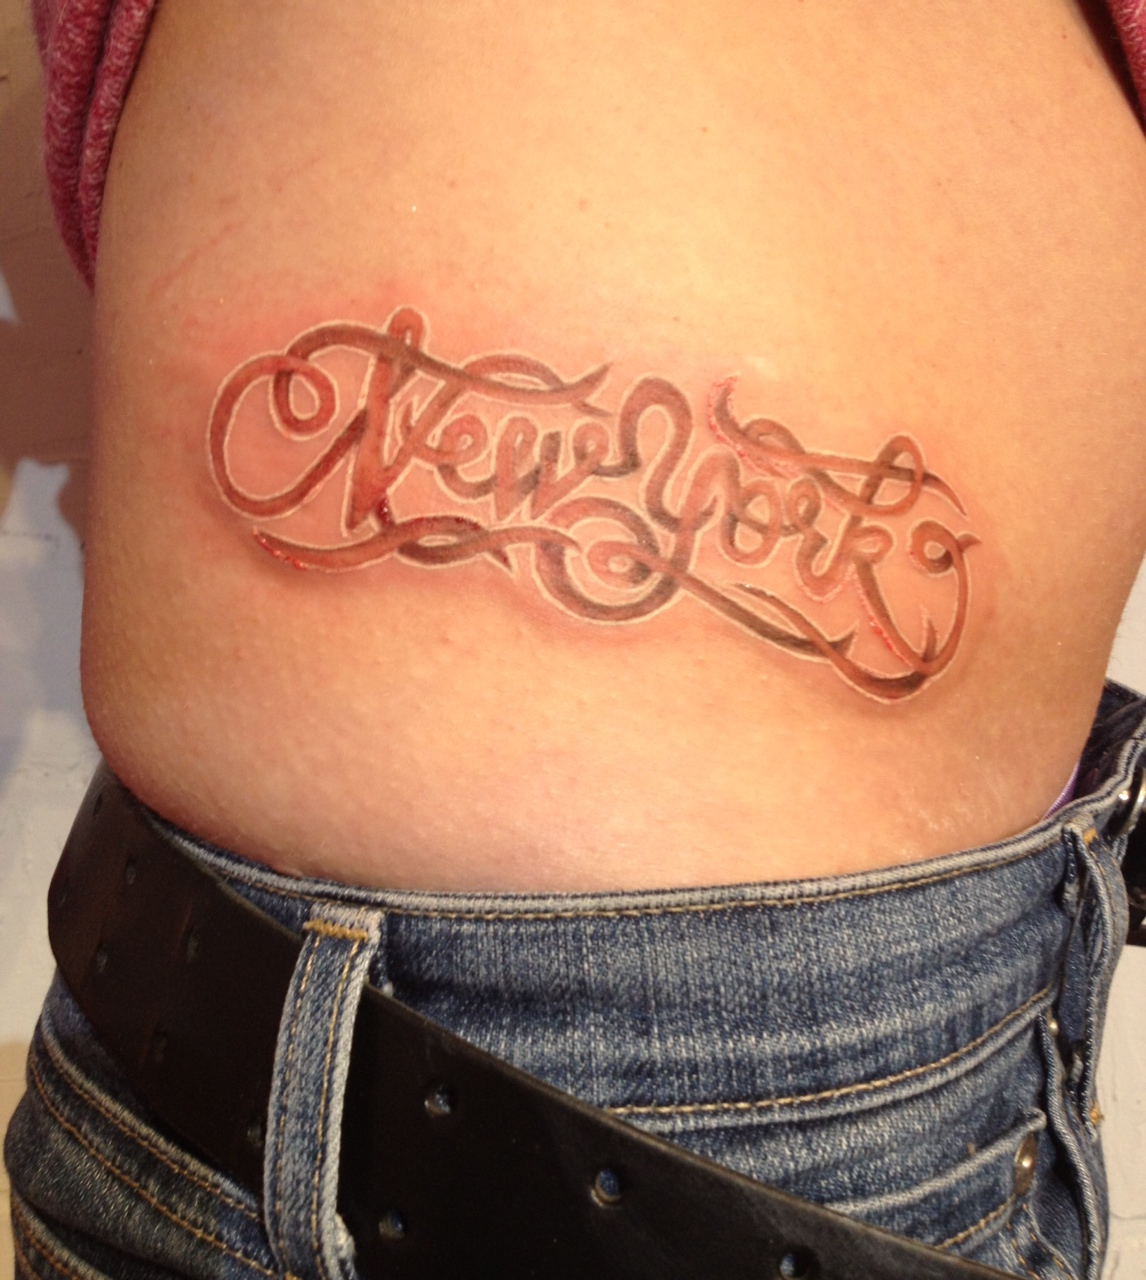 New York script tattoo with white ink